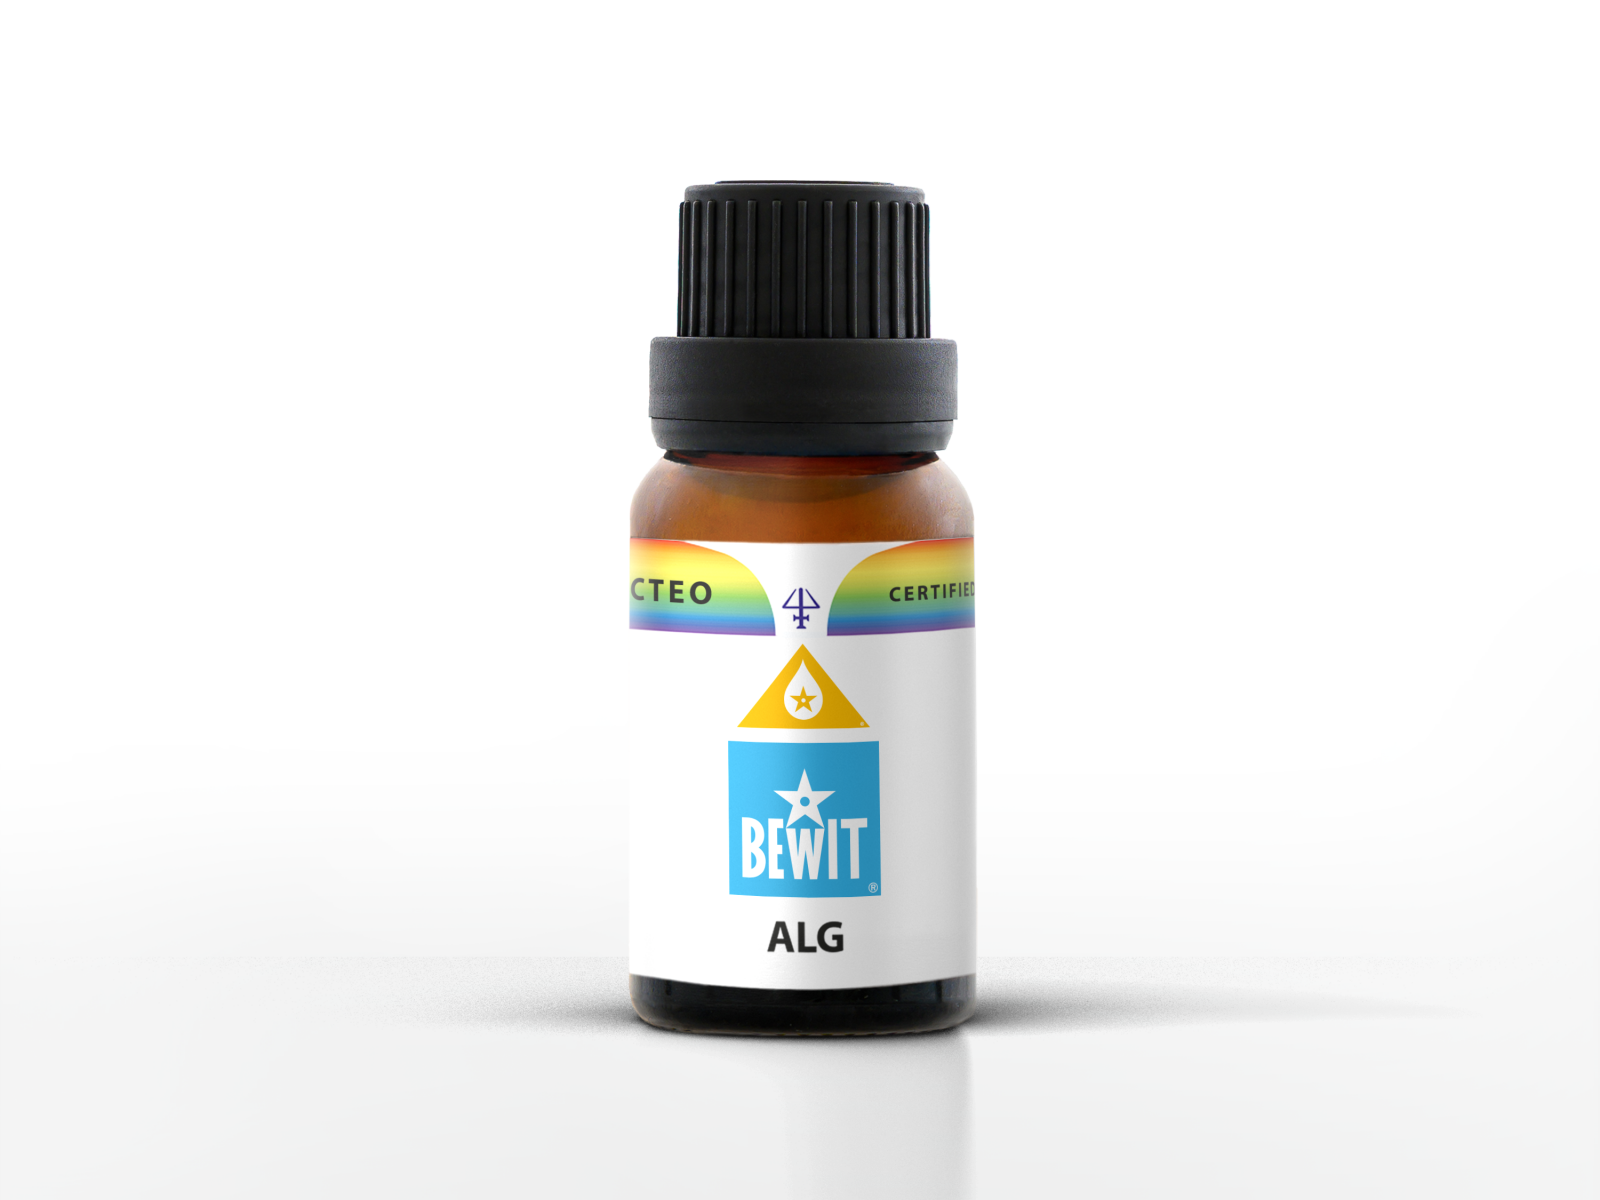 BEWIT ALG - 100% natural essential oil blend in CTEO® quality